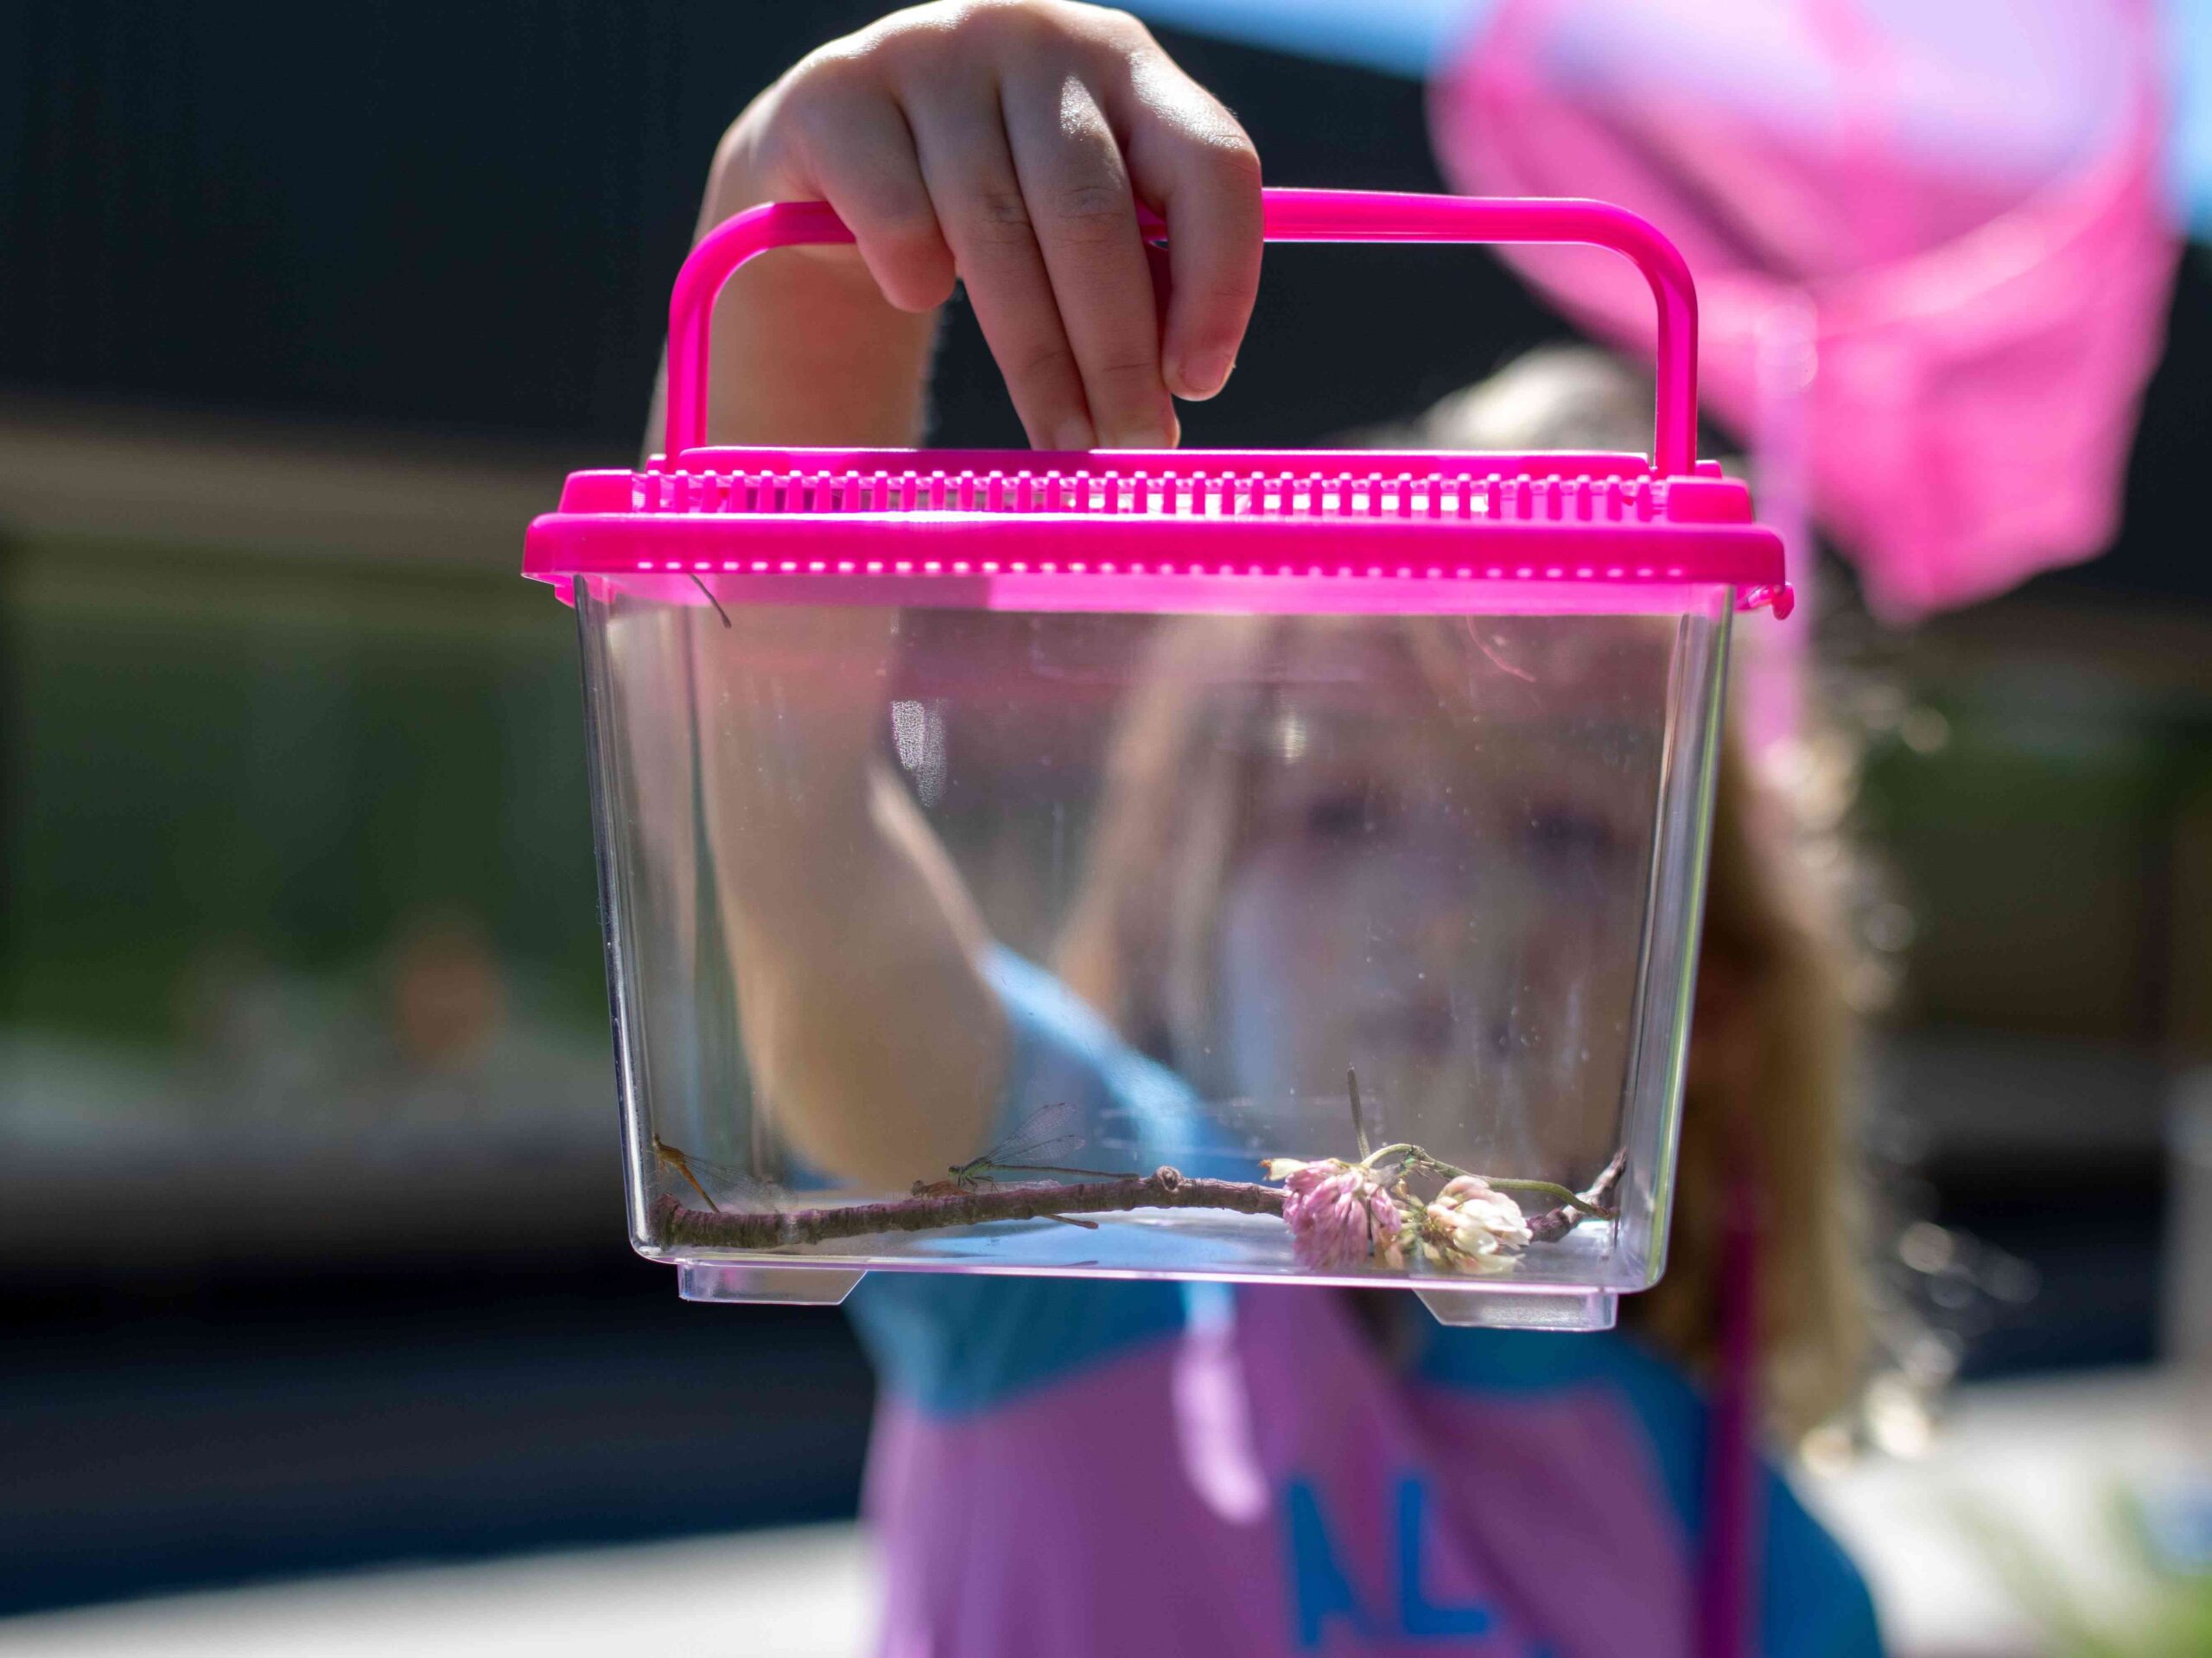 A young child holding up an insect box with a dragonfly inside